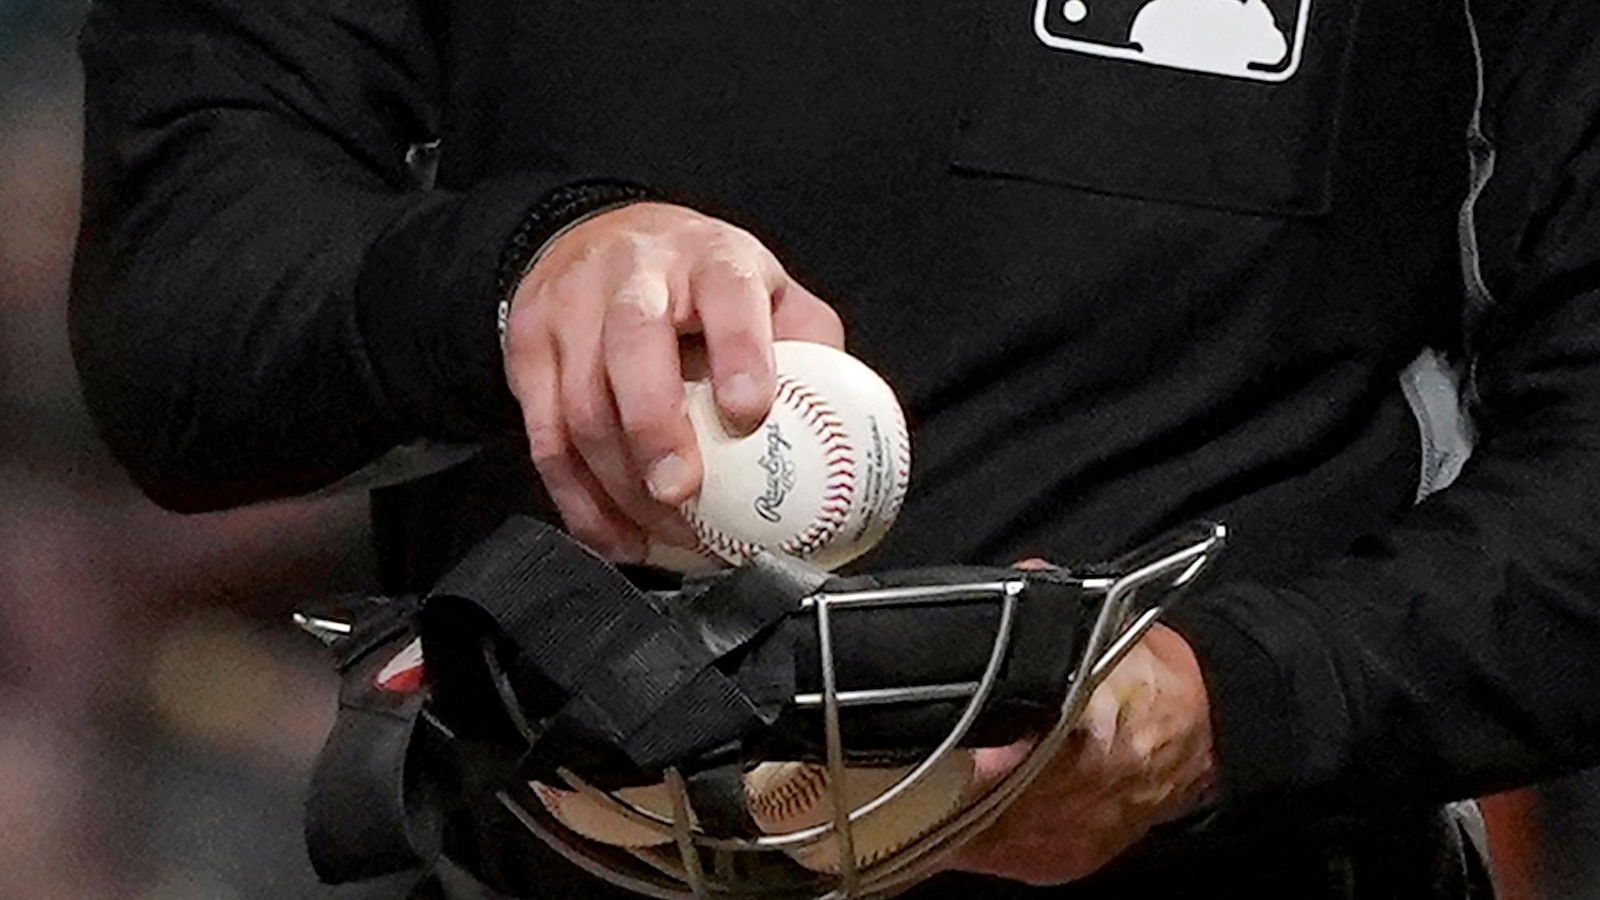 Ex-minor league umpire sues MLB, says he was harassed by female ump, fired for being bisexual man